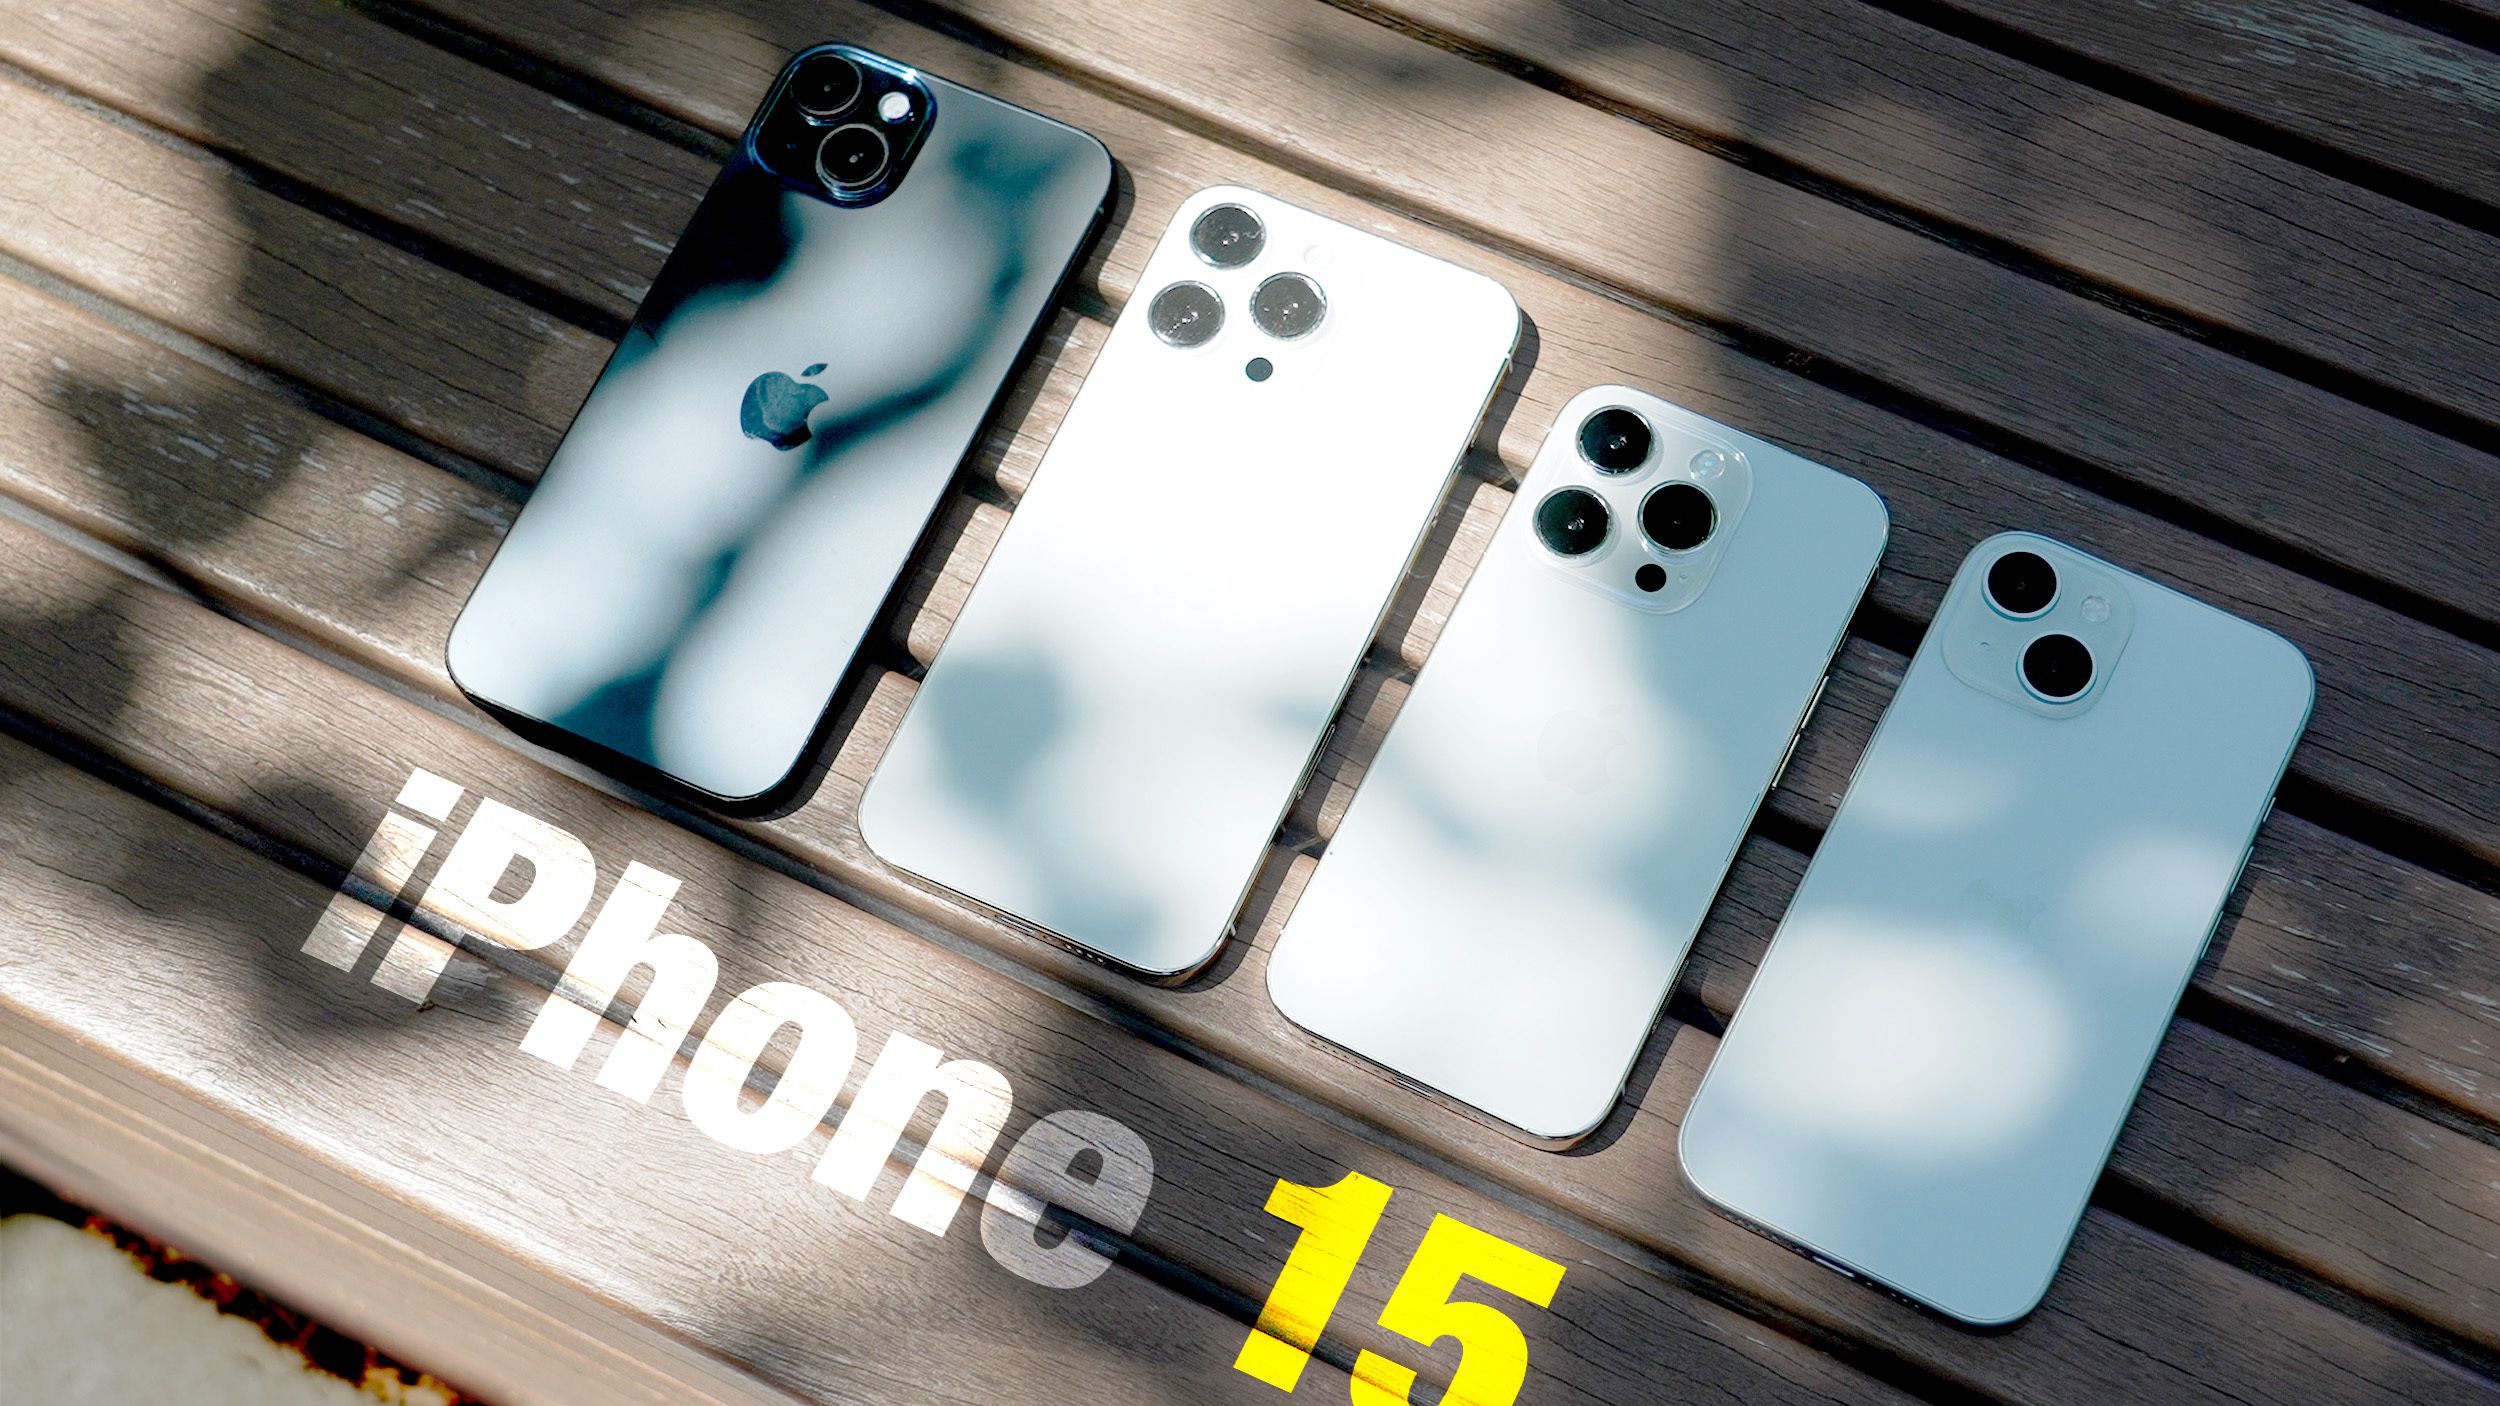 Hands-On: What the iPhone 15 and iPhone 15 Pro Will Look Like